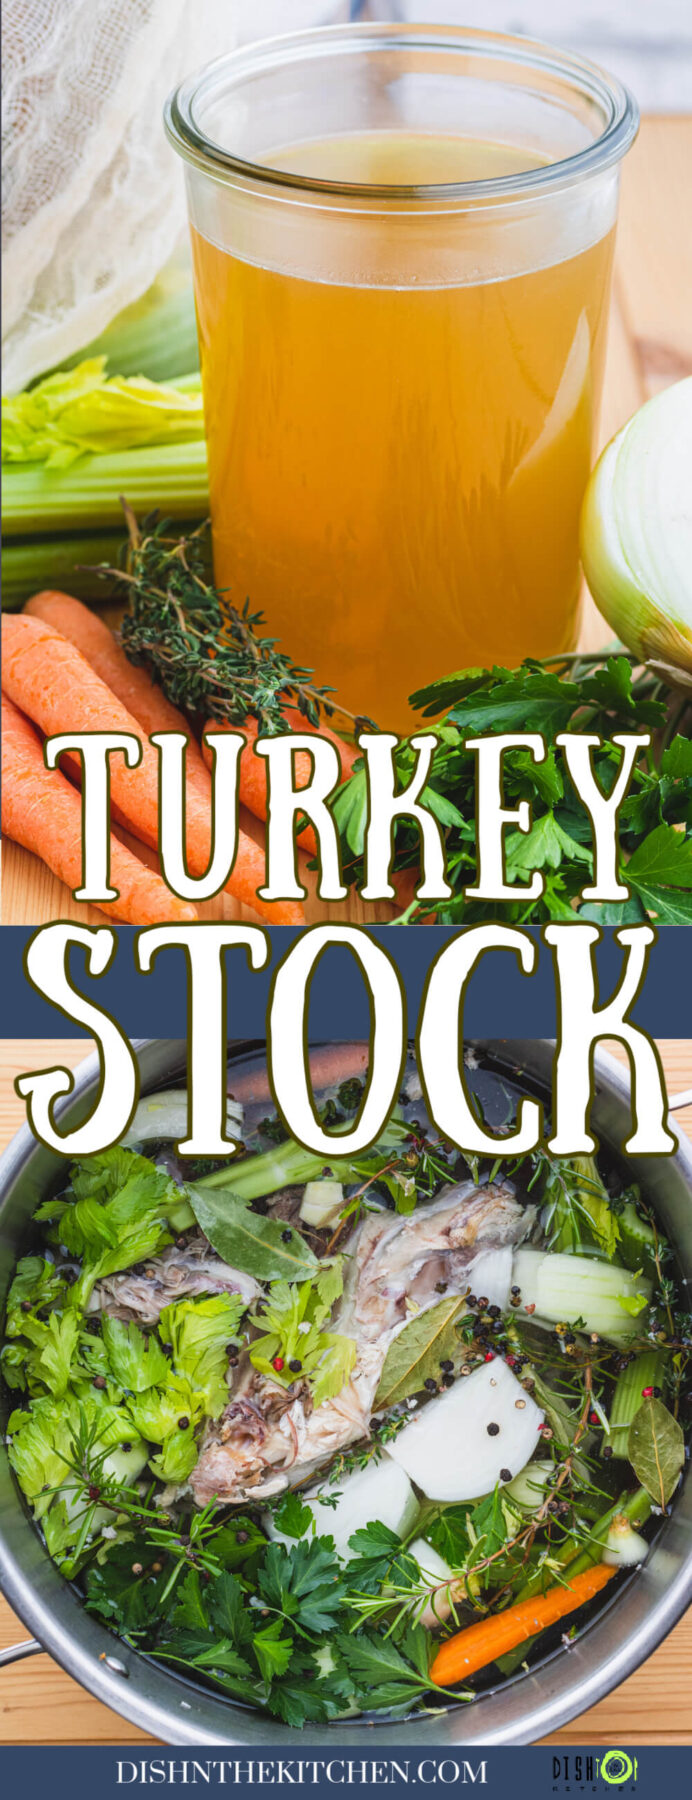 Pinterest image featuring a glass jar filled with golden turkey stock and a stock pot filled with ingredients.